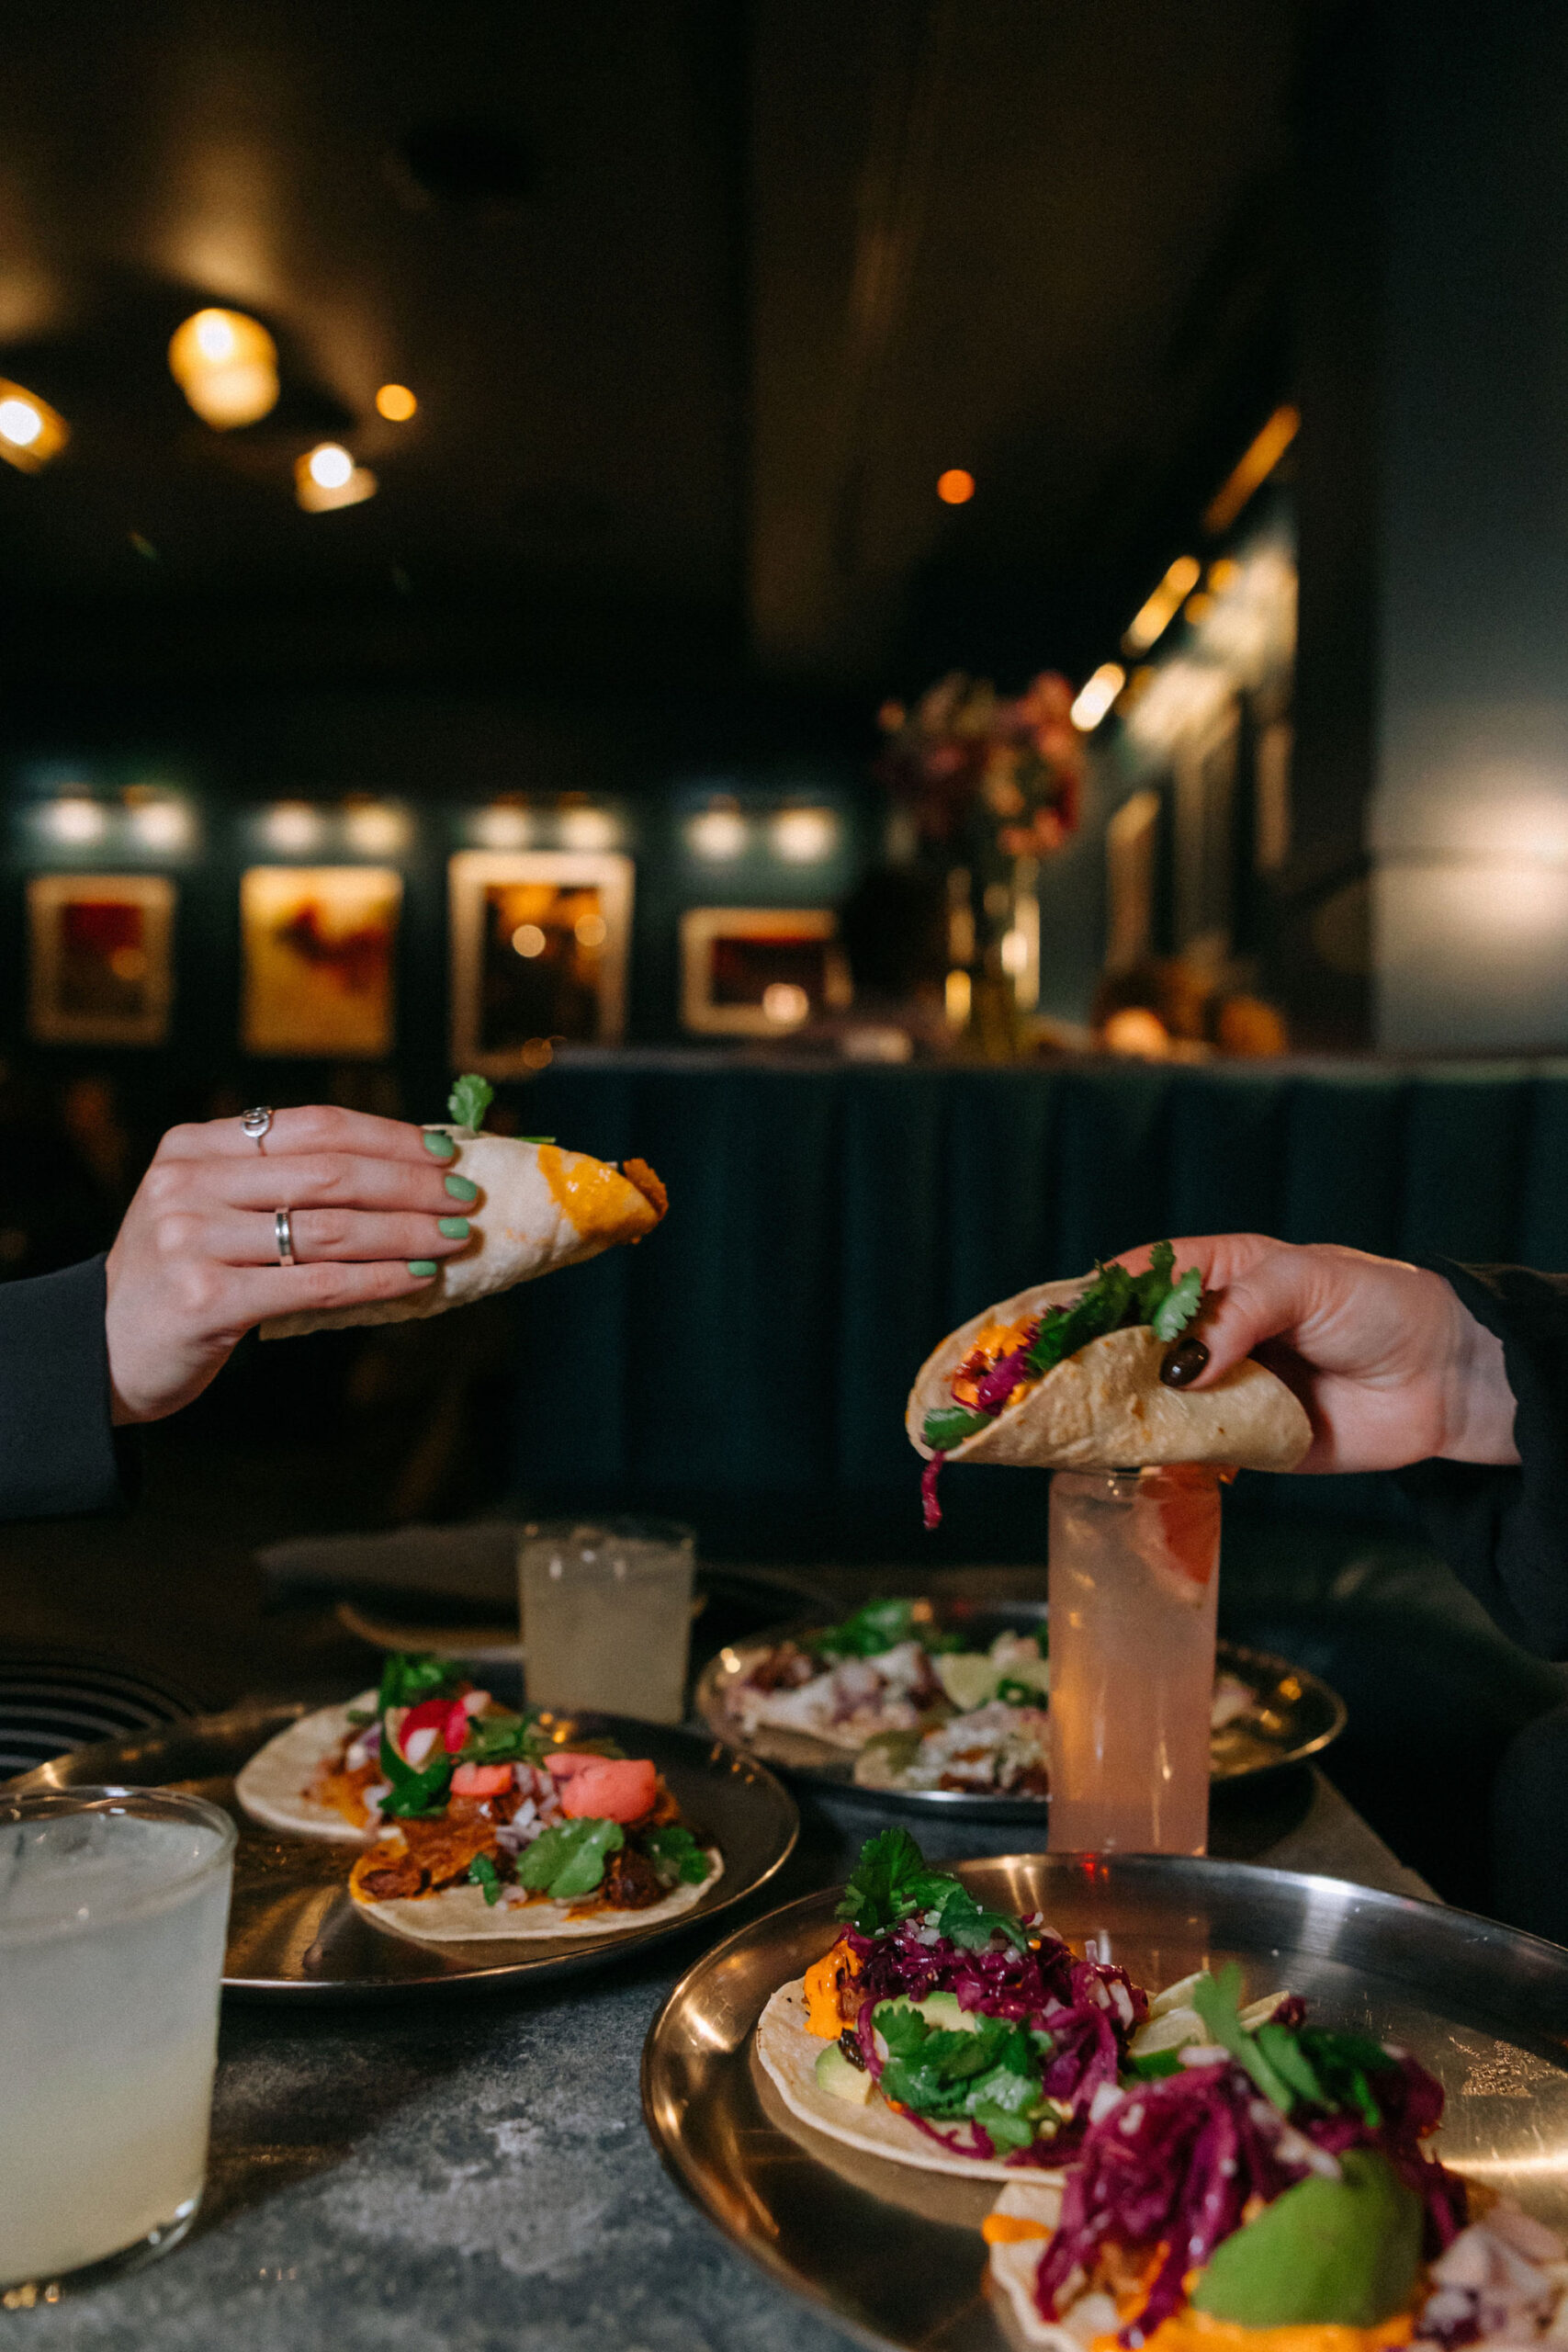 Two hands holding tacos over a table with multiple plates of tacos and drinks in a dimly lit restaurant. The background shows a stylish, dark interior with framed pictures on the walls.